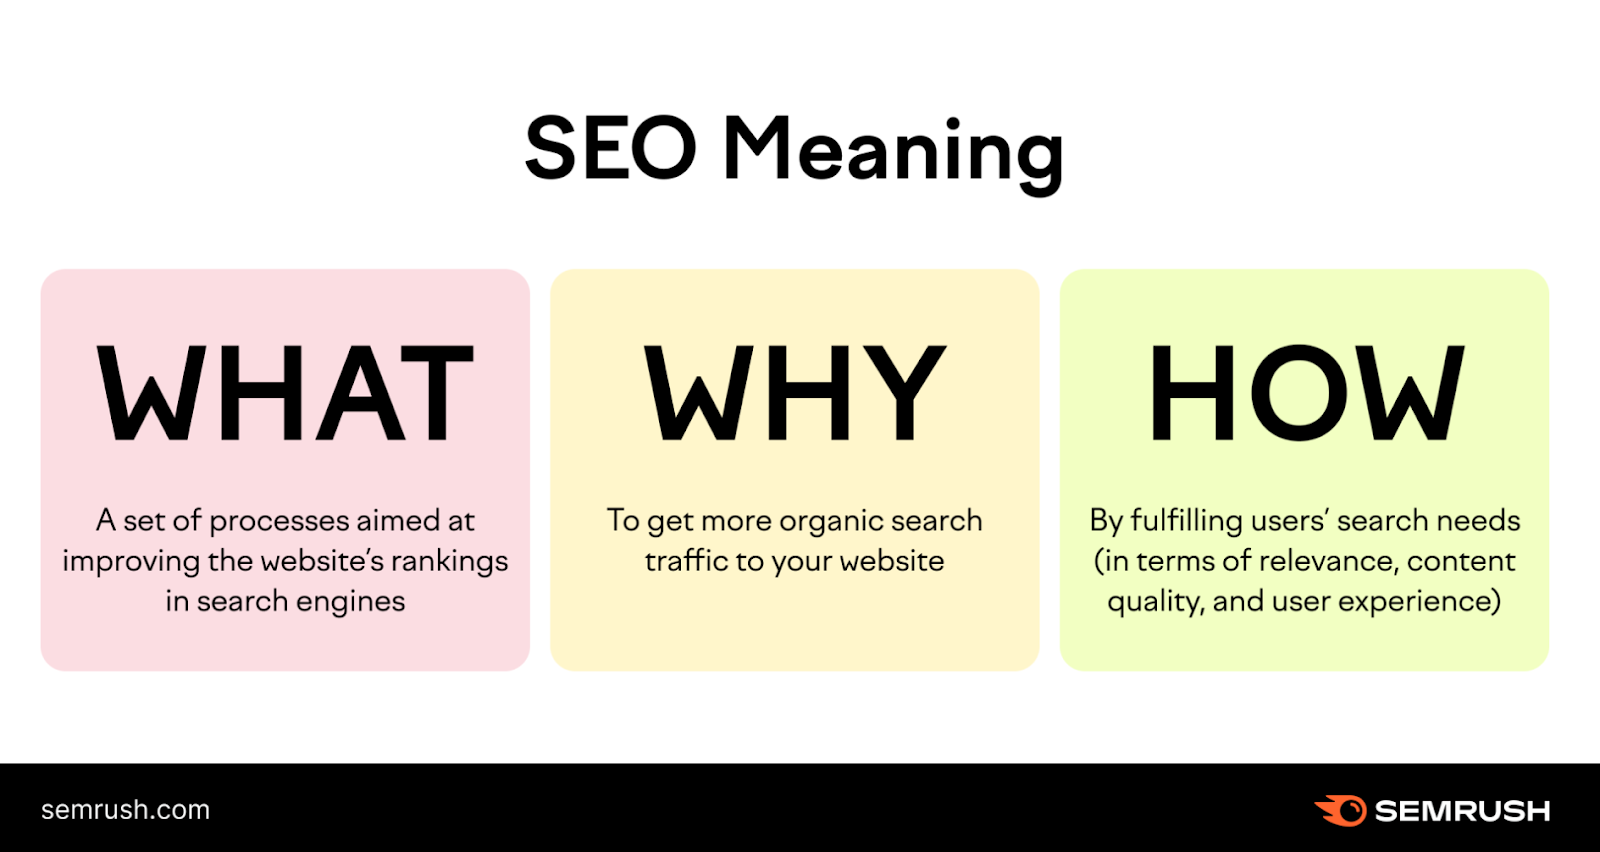 A visual explaining the meaning of SEO